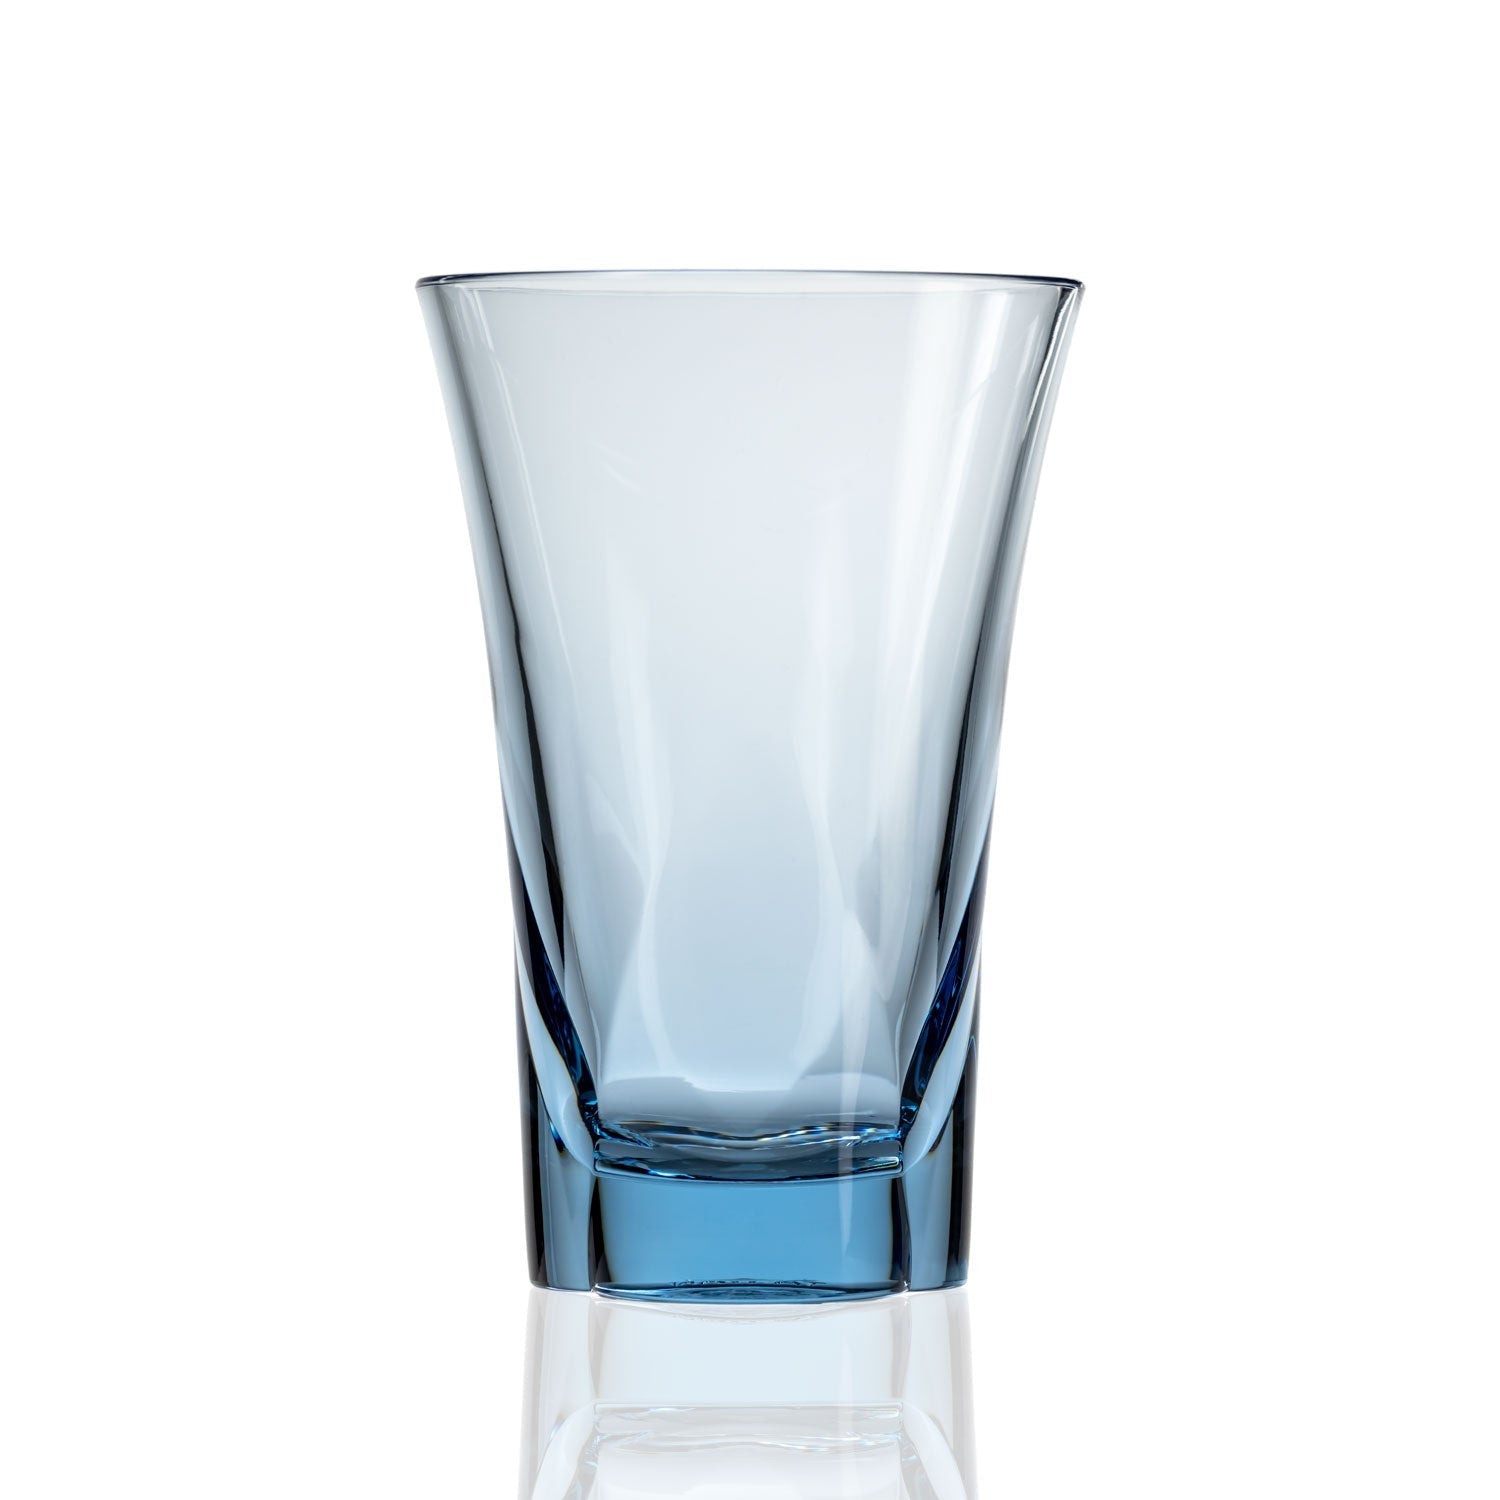 16-ounce blue acrylic tumbler in the Fiori collection by Merritt Designs. Front view on white background